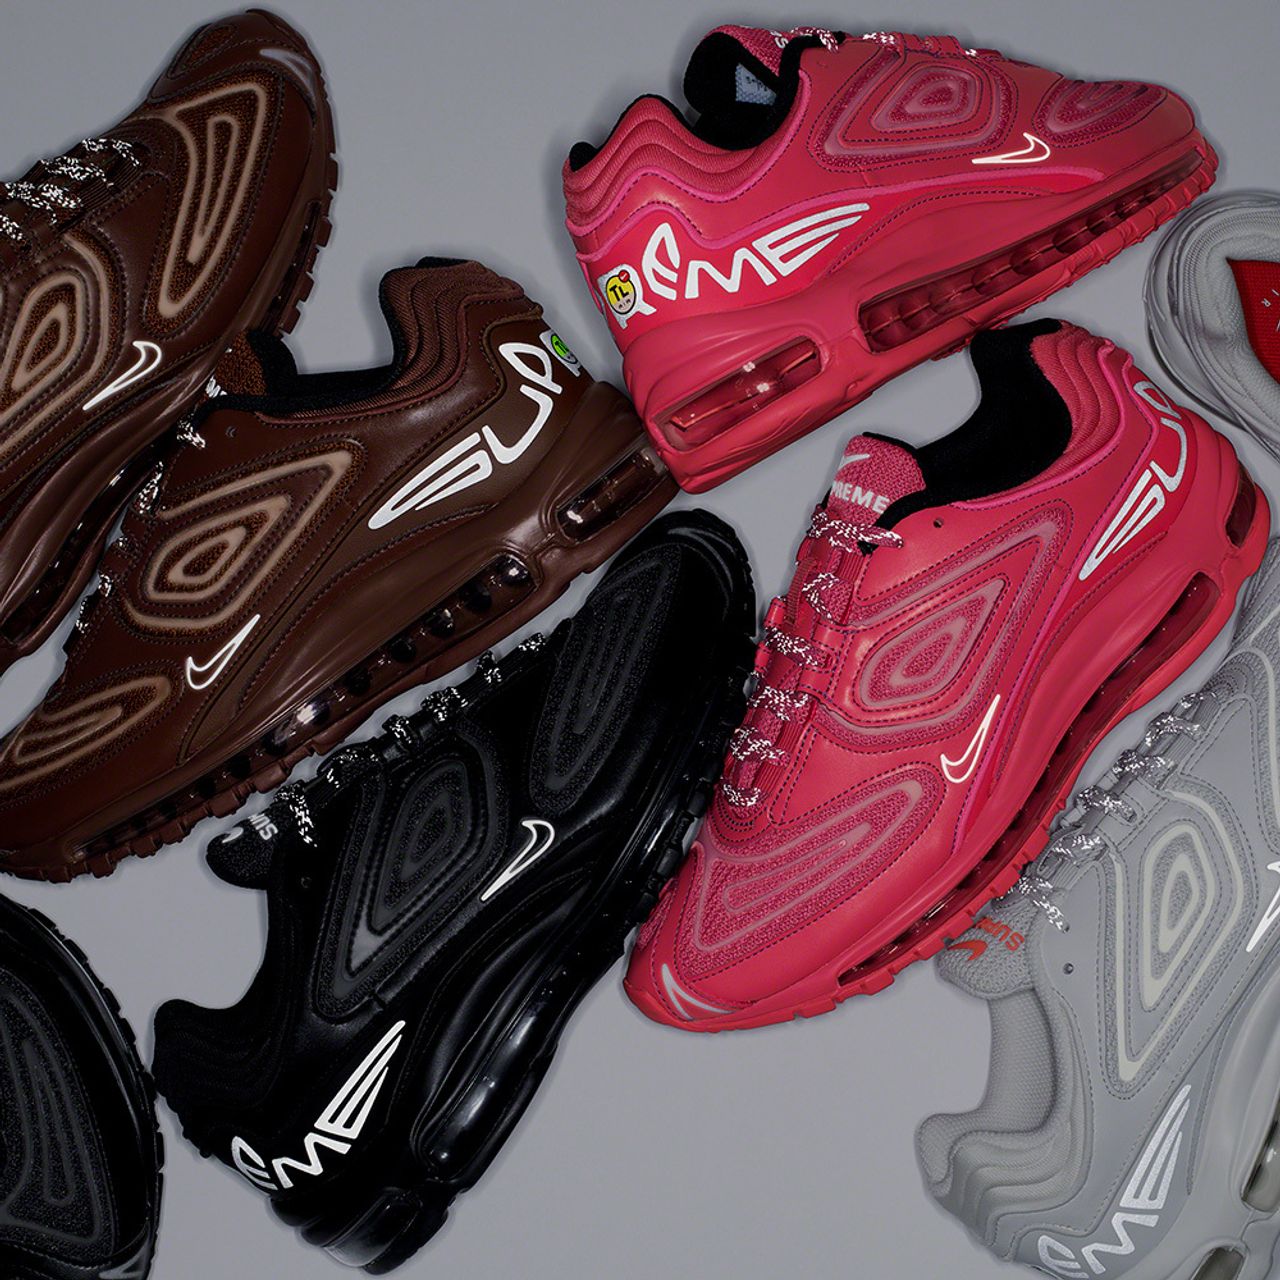 Supreme Officially Announce Nike Air Max 98 TL - Freaker